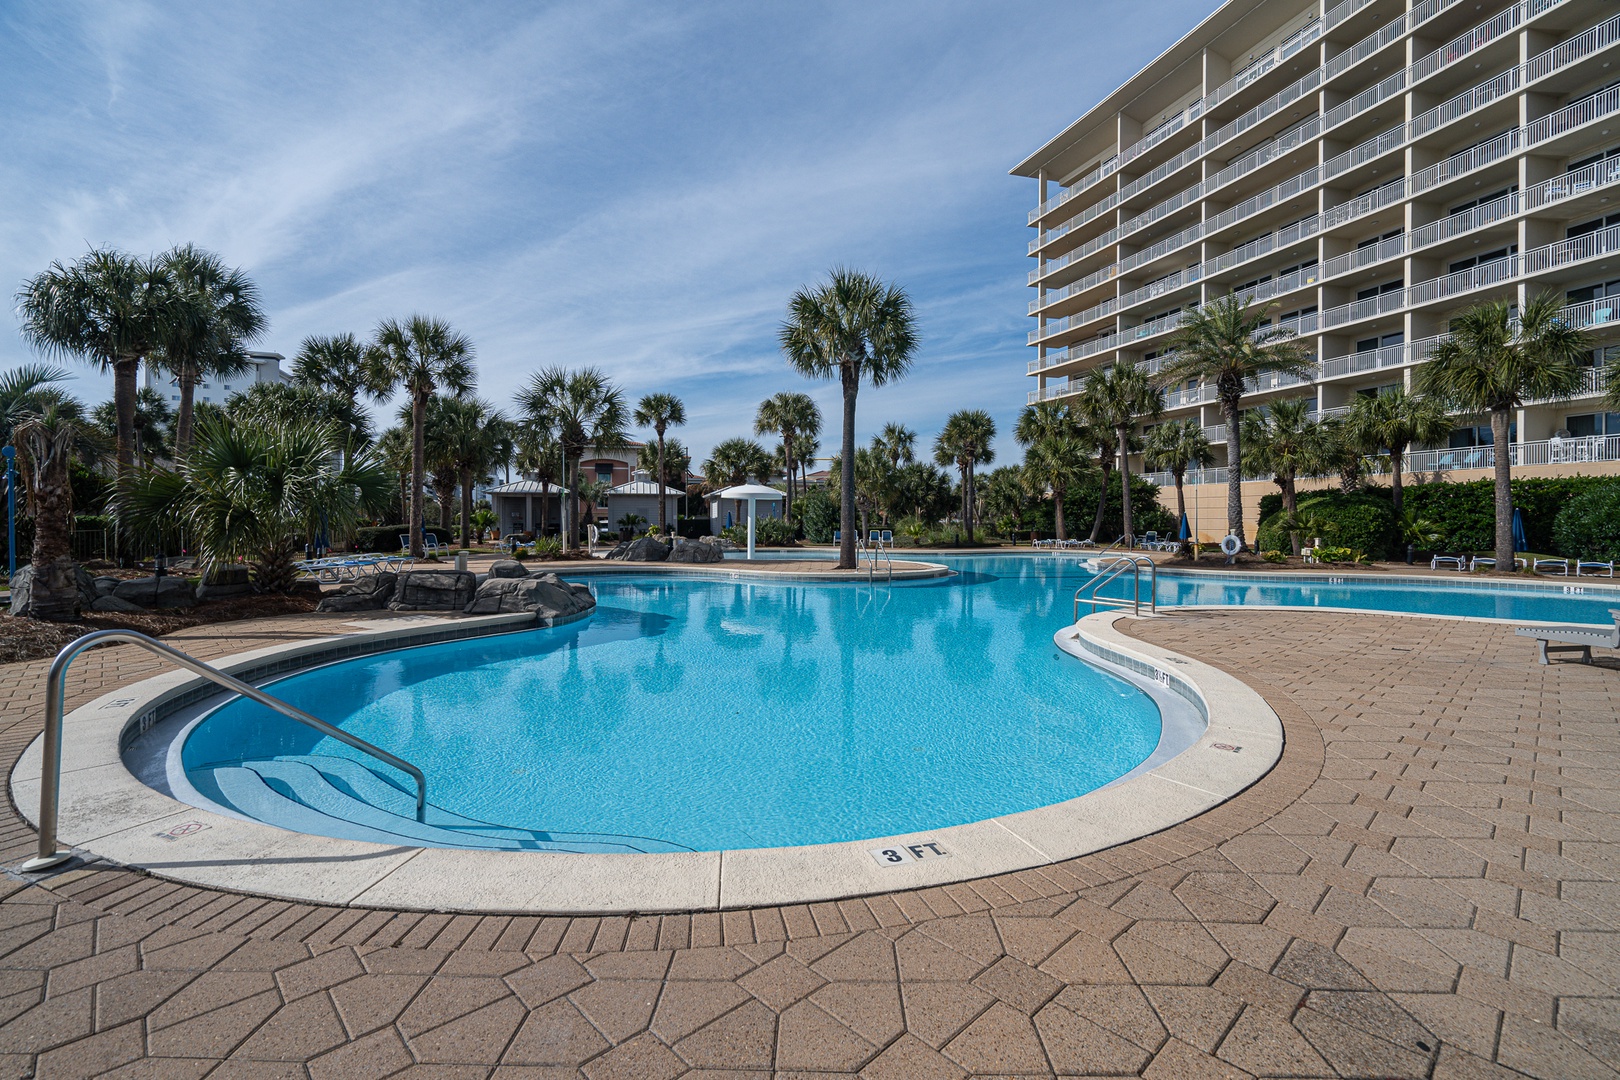 Make a splash or lounge the day away at the sparkling community pool